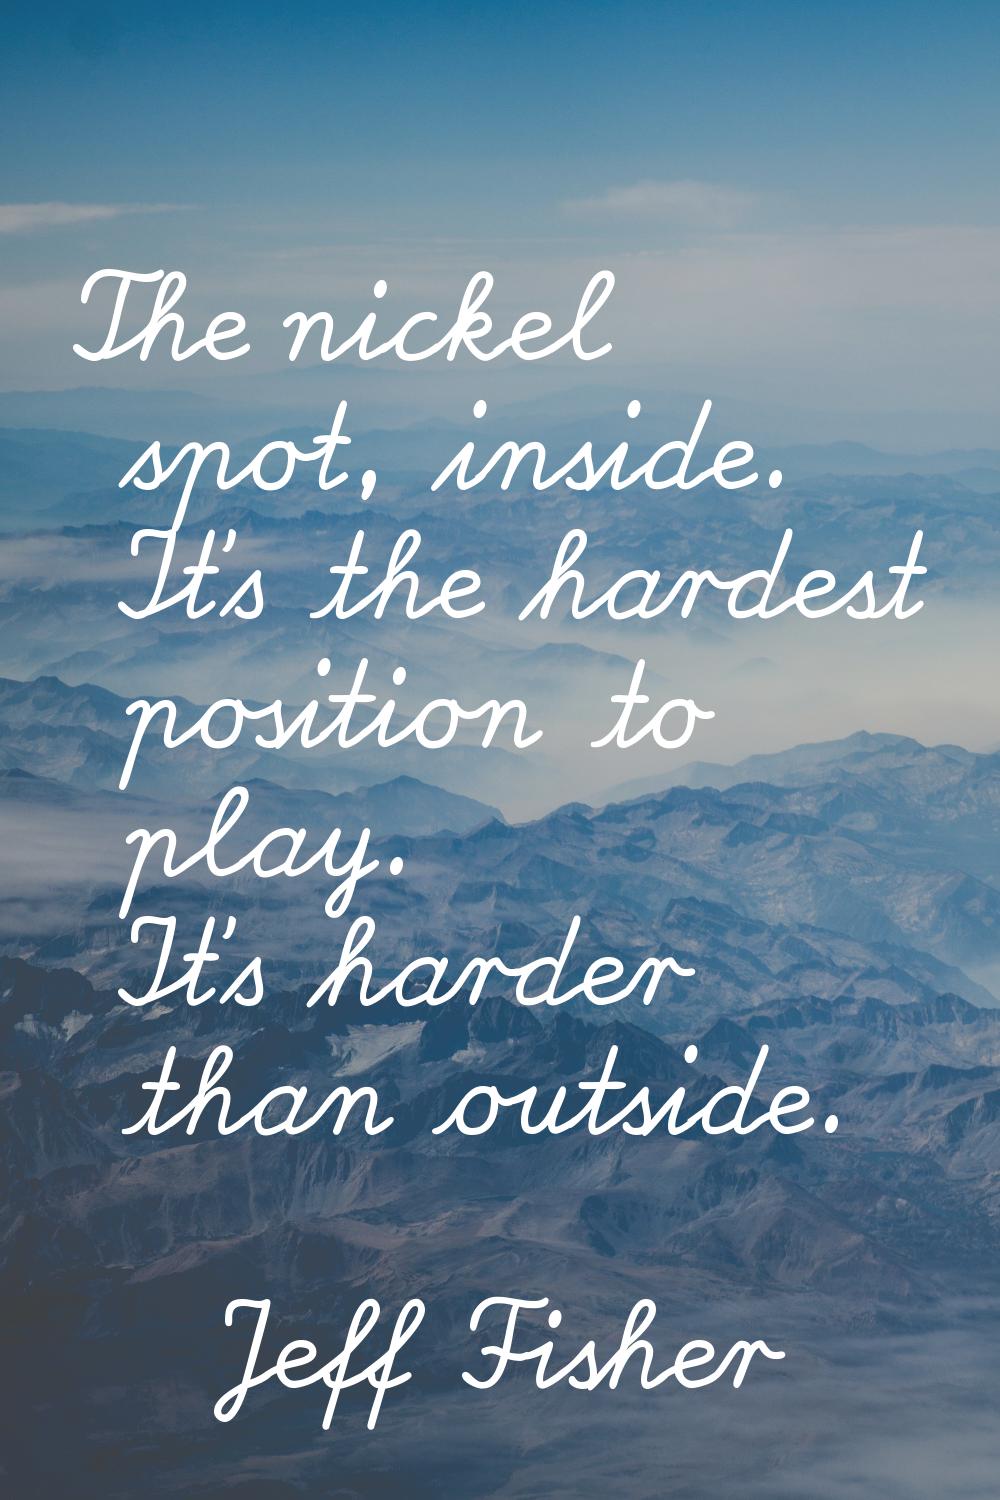 The nickel spot, inside. It's the hardest position to play. It's harder than outside.